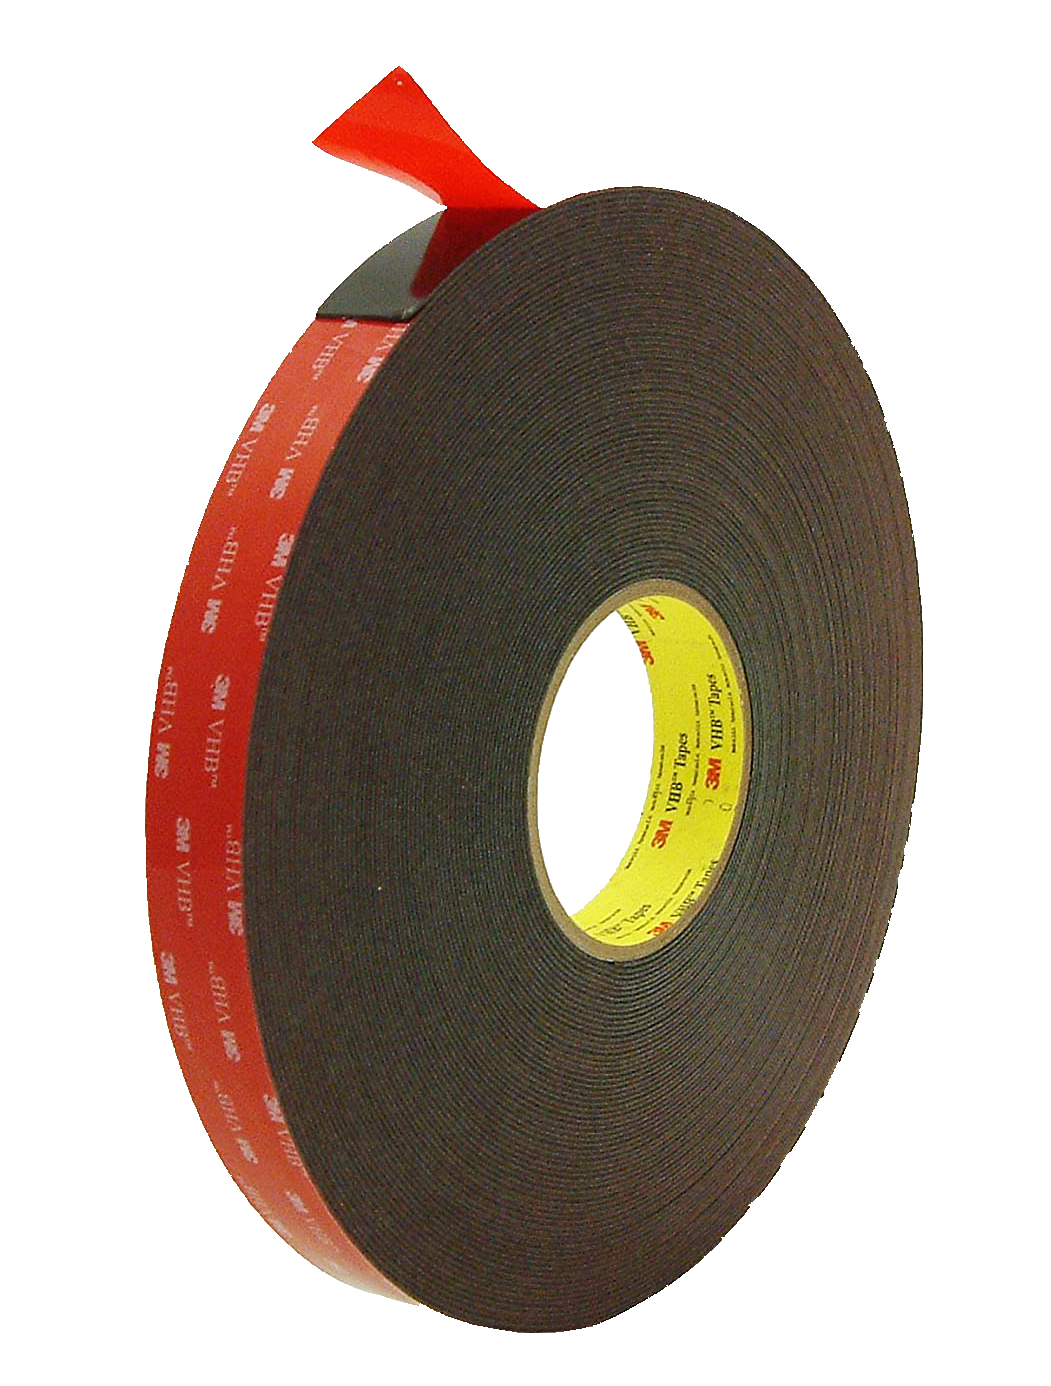 3M Double Sided Tape VS 3M Adhesive Spray - Which is Better